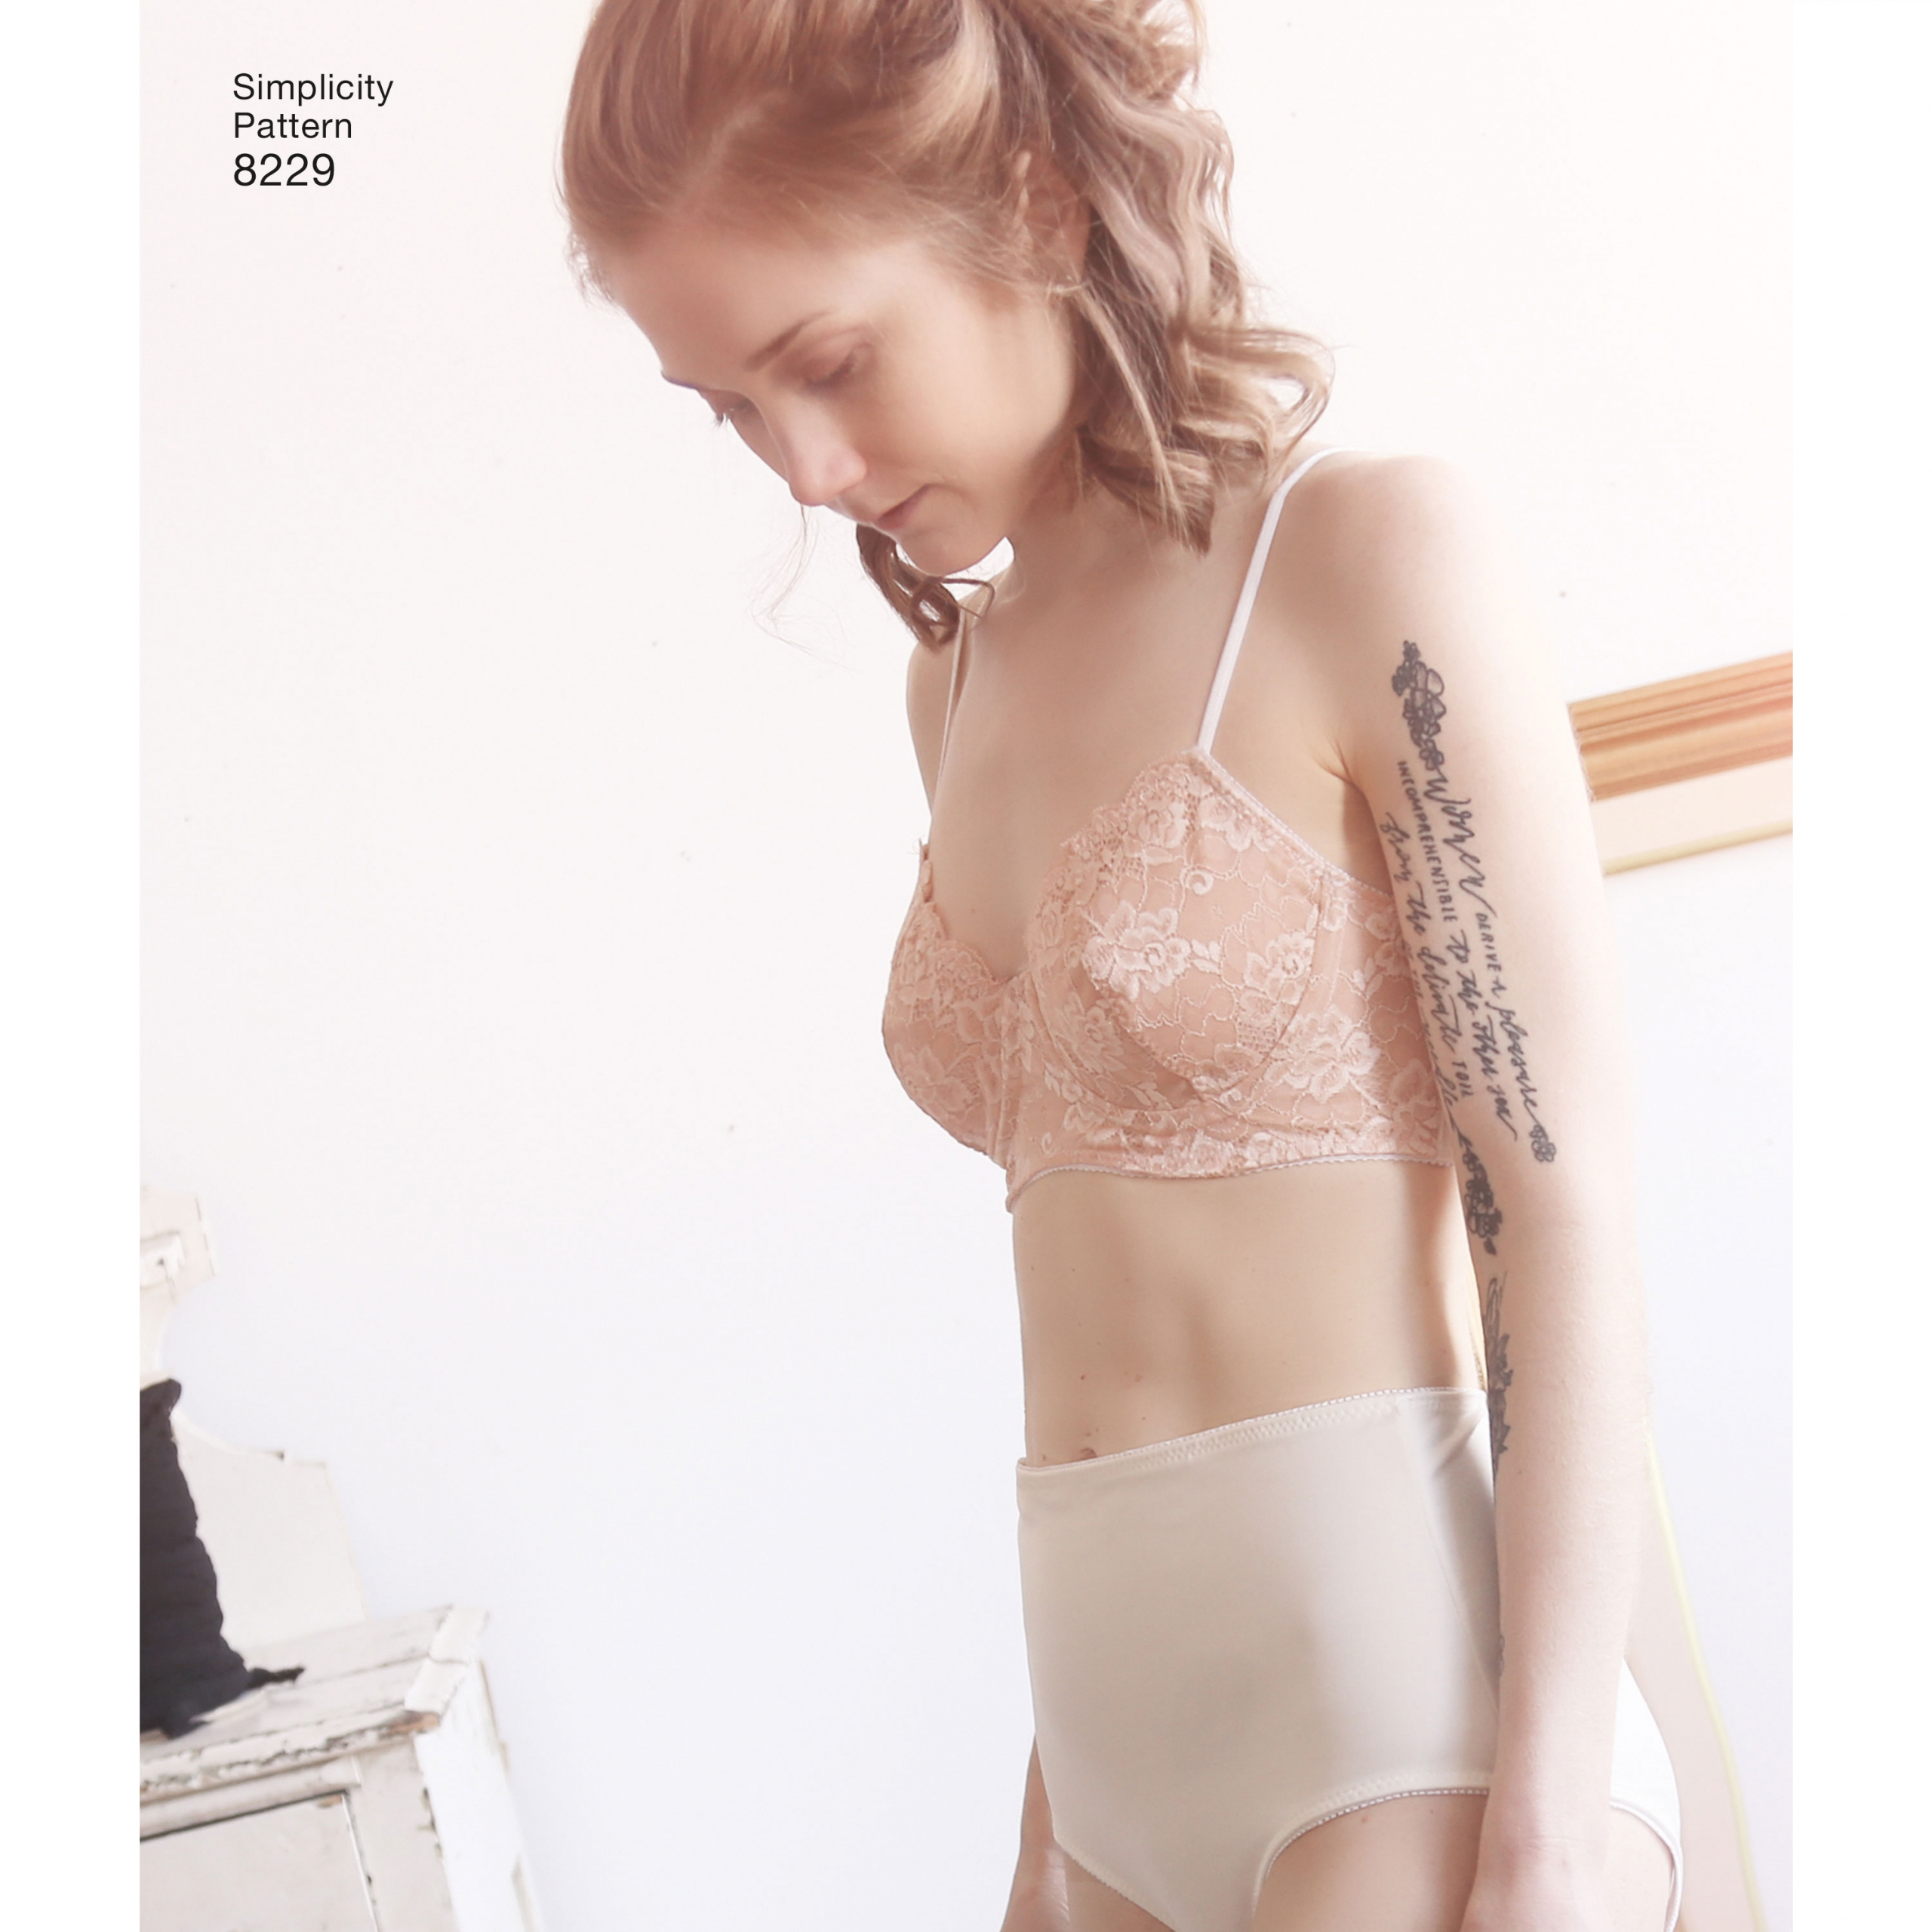 Sewdirect UK - 10 Patterns to get into lingerie making